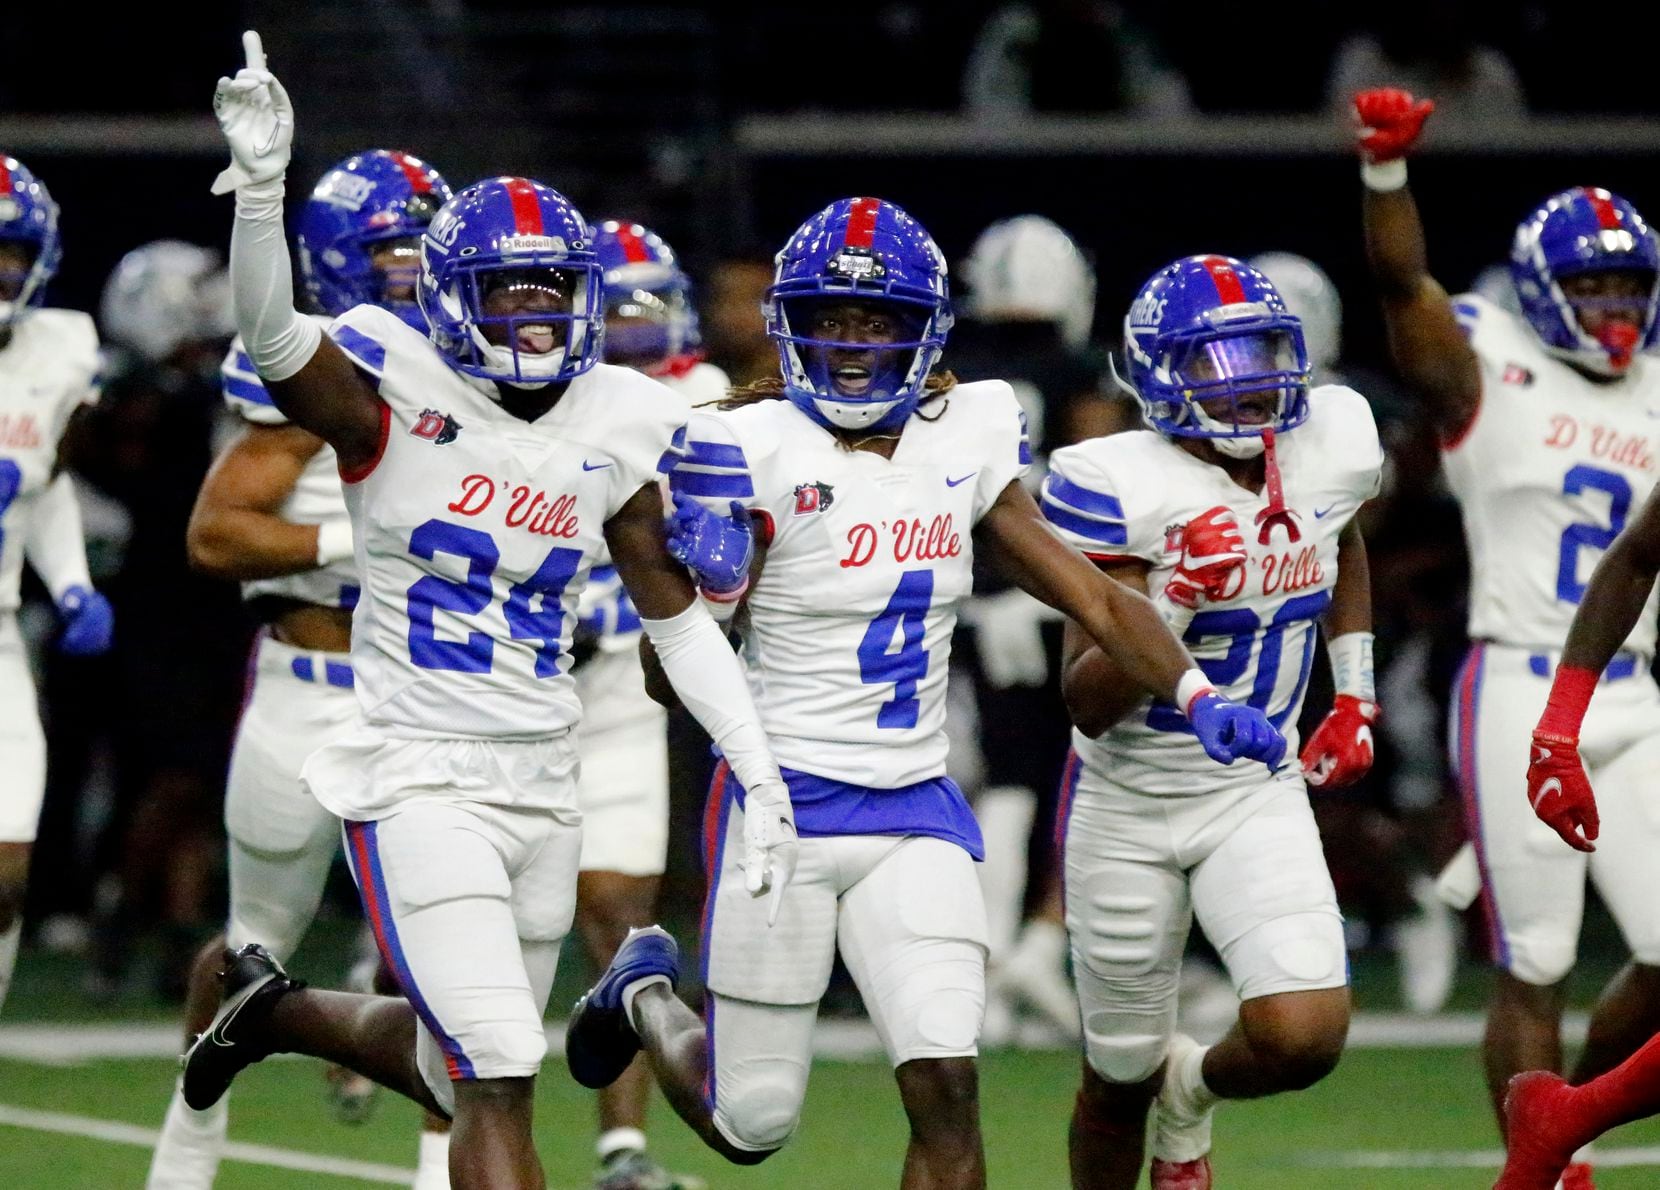 Duncanville High School defensive back Ka’davion Dotson-walker (24) celebrates his interception with the defense during the first half as Duncanville High School played Spring High School in a Class 6A Division I Region II semifinal football game at The Ford Center in Frisco on Saturday, November 27, 2021. (Stewart F. House/Special Contributor)